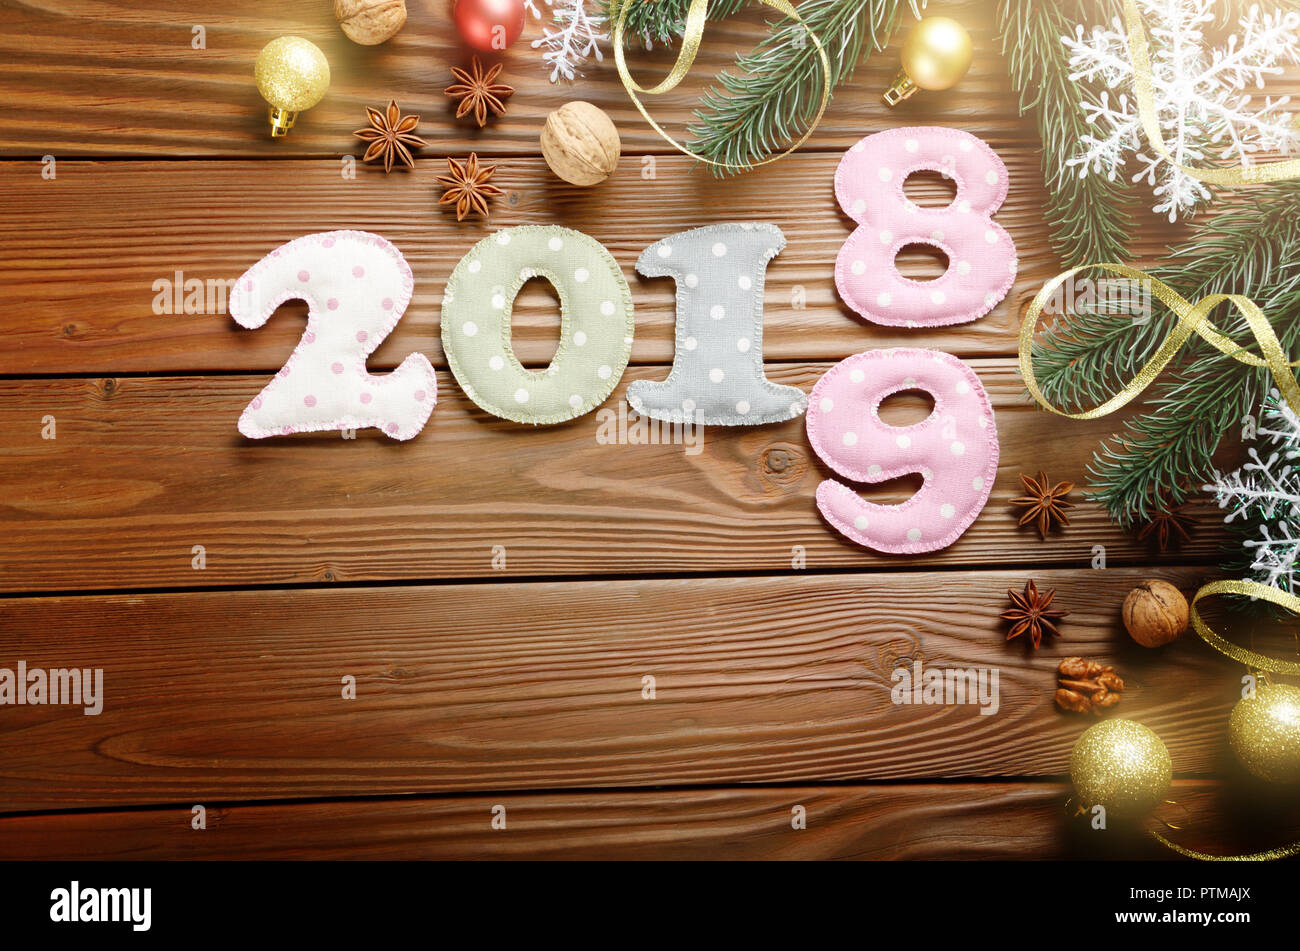 Colorful stitched digits 2 0 1 8 9 of polkadot fabric with Christmas decorations flat lyed on wooden background. Space for text Stock Photo